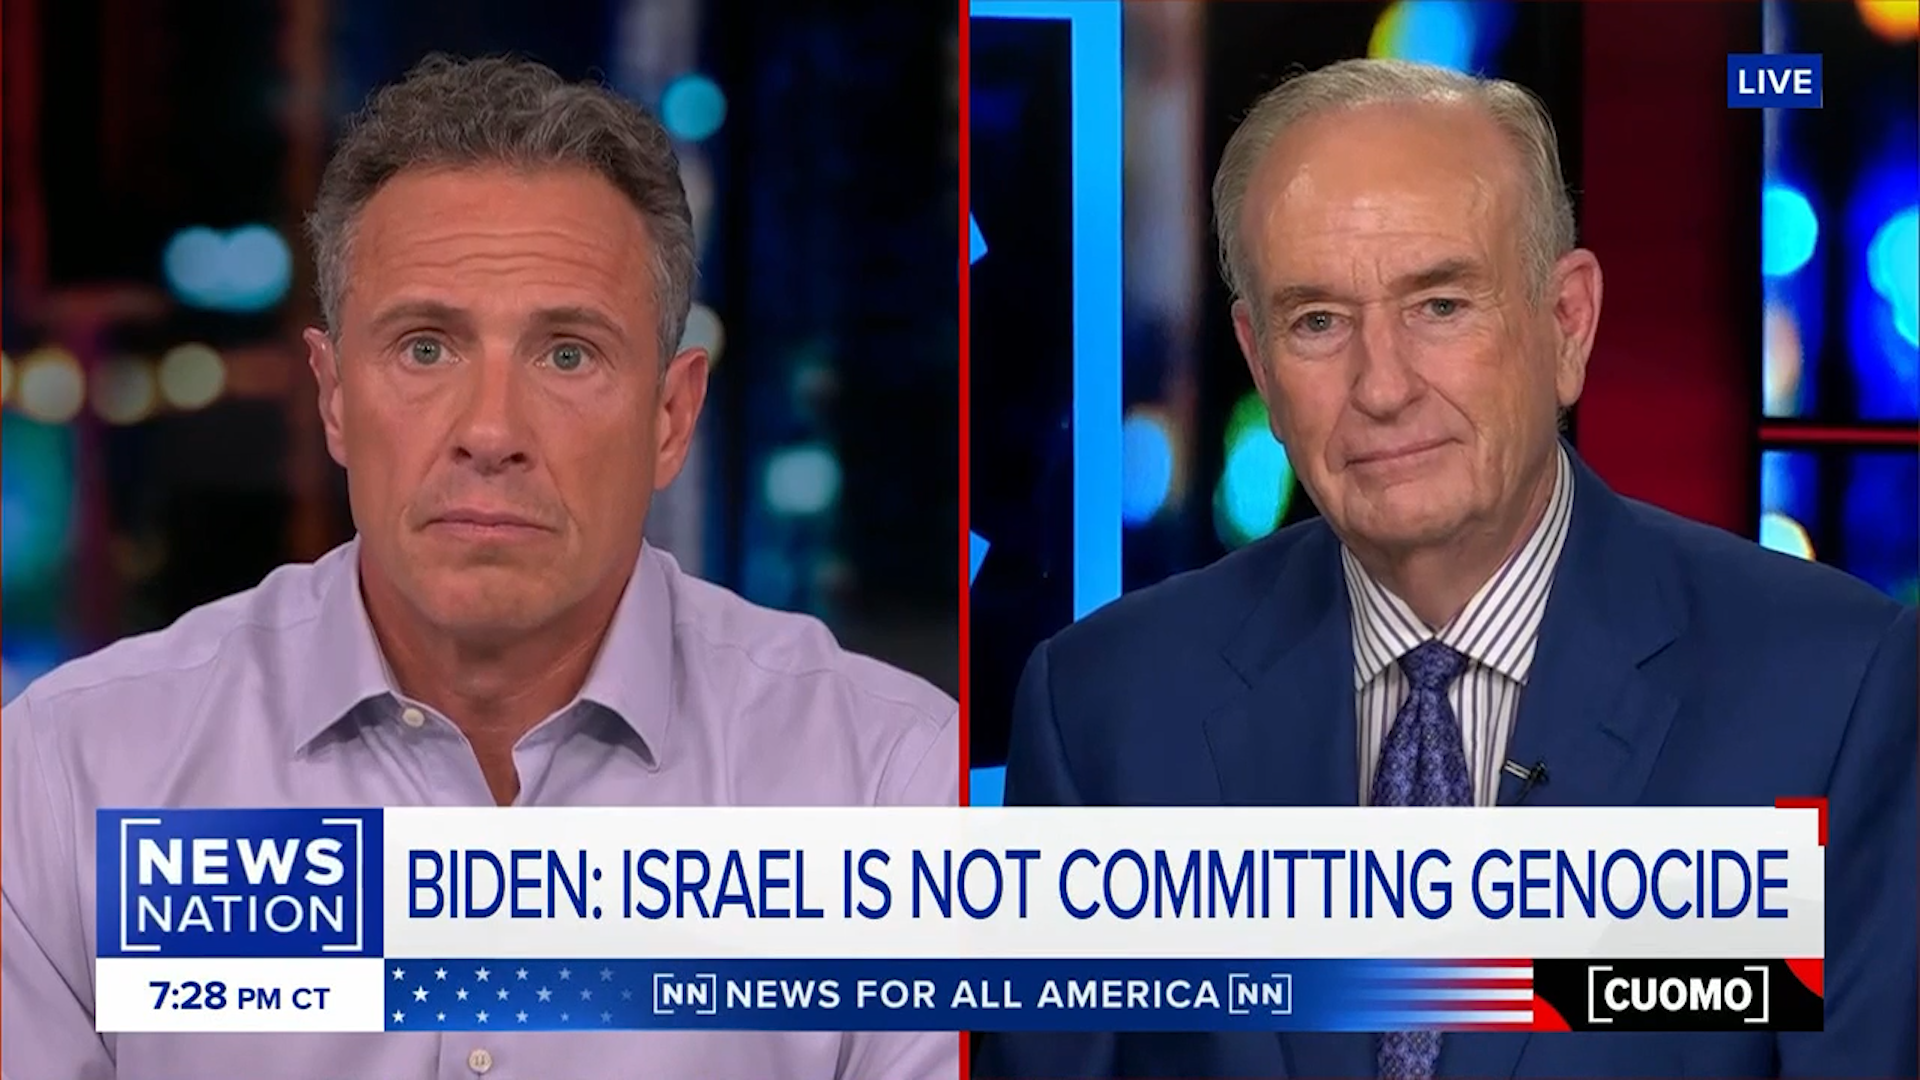 O'Reilly and Cuomo on Israel and Netanyahu's Invite